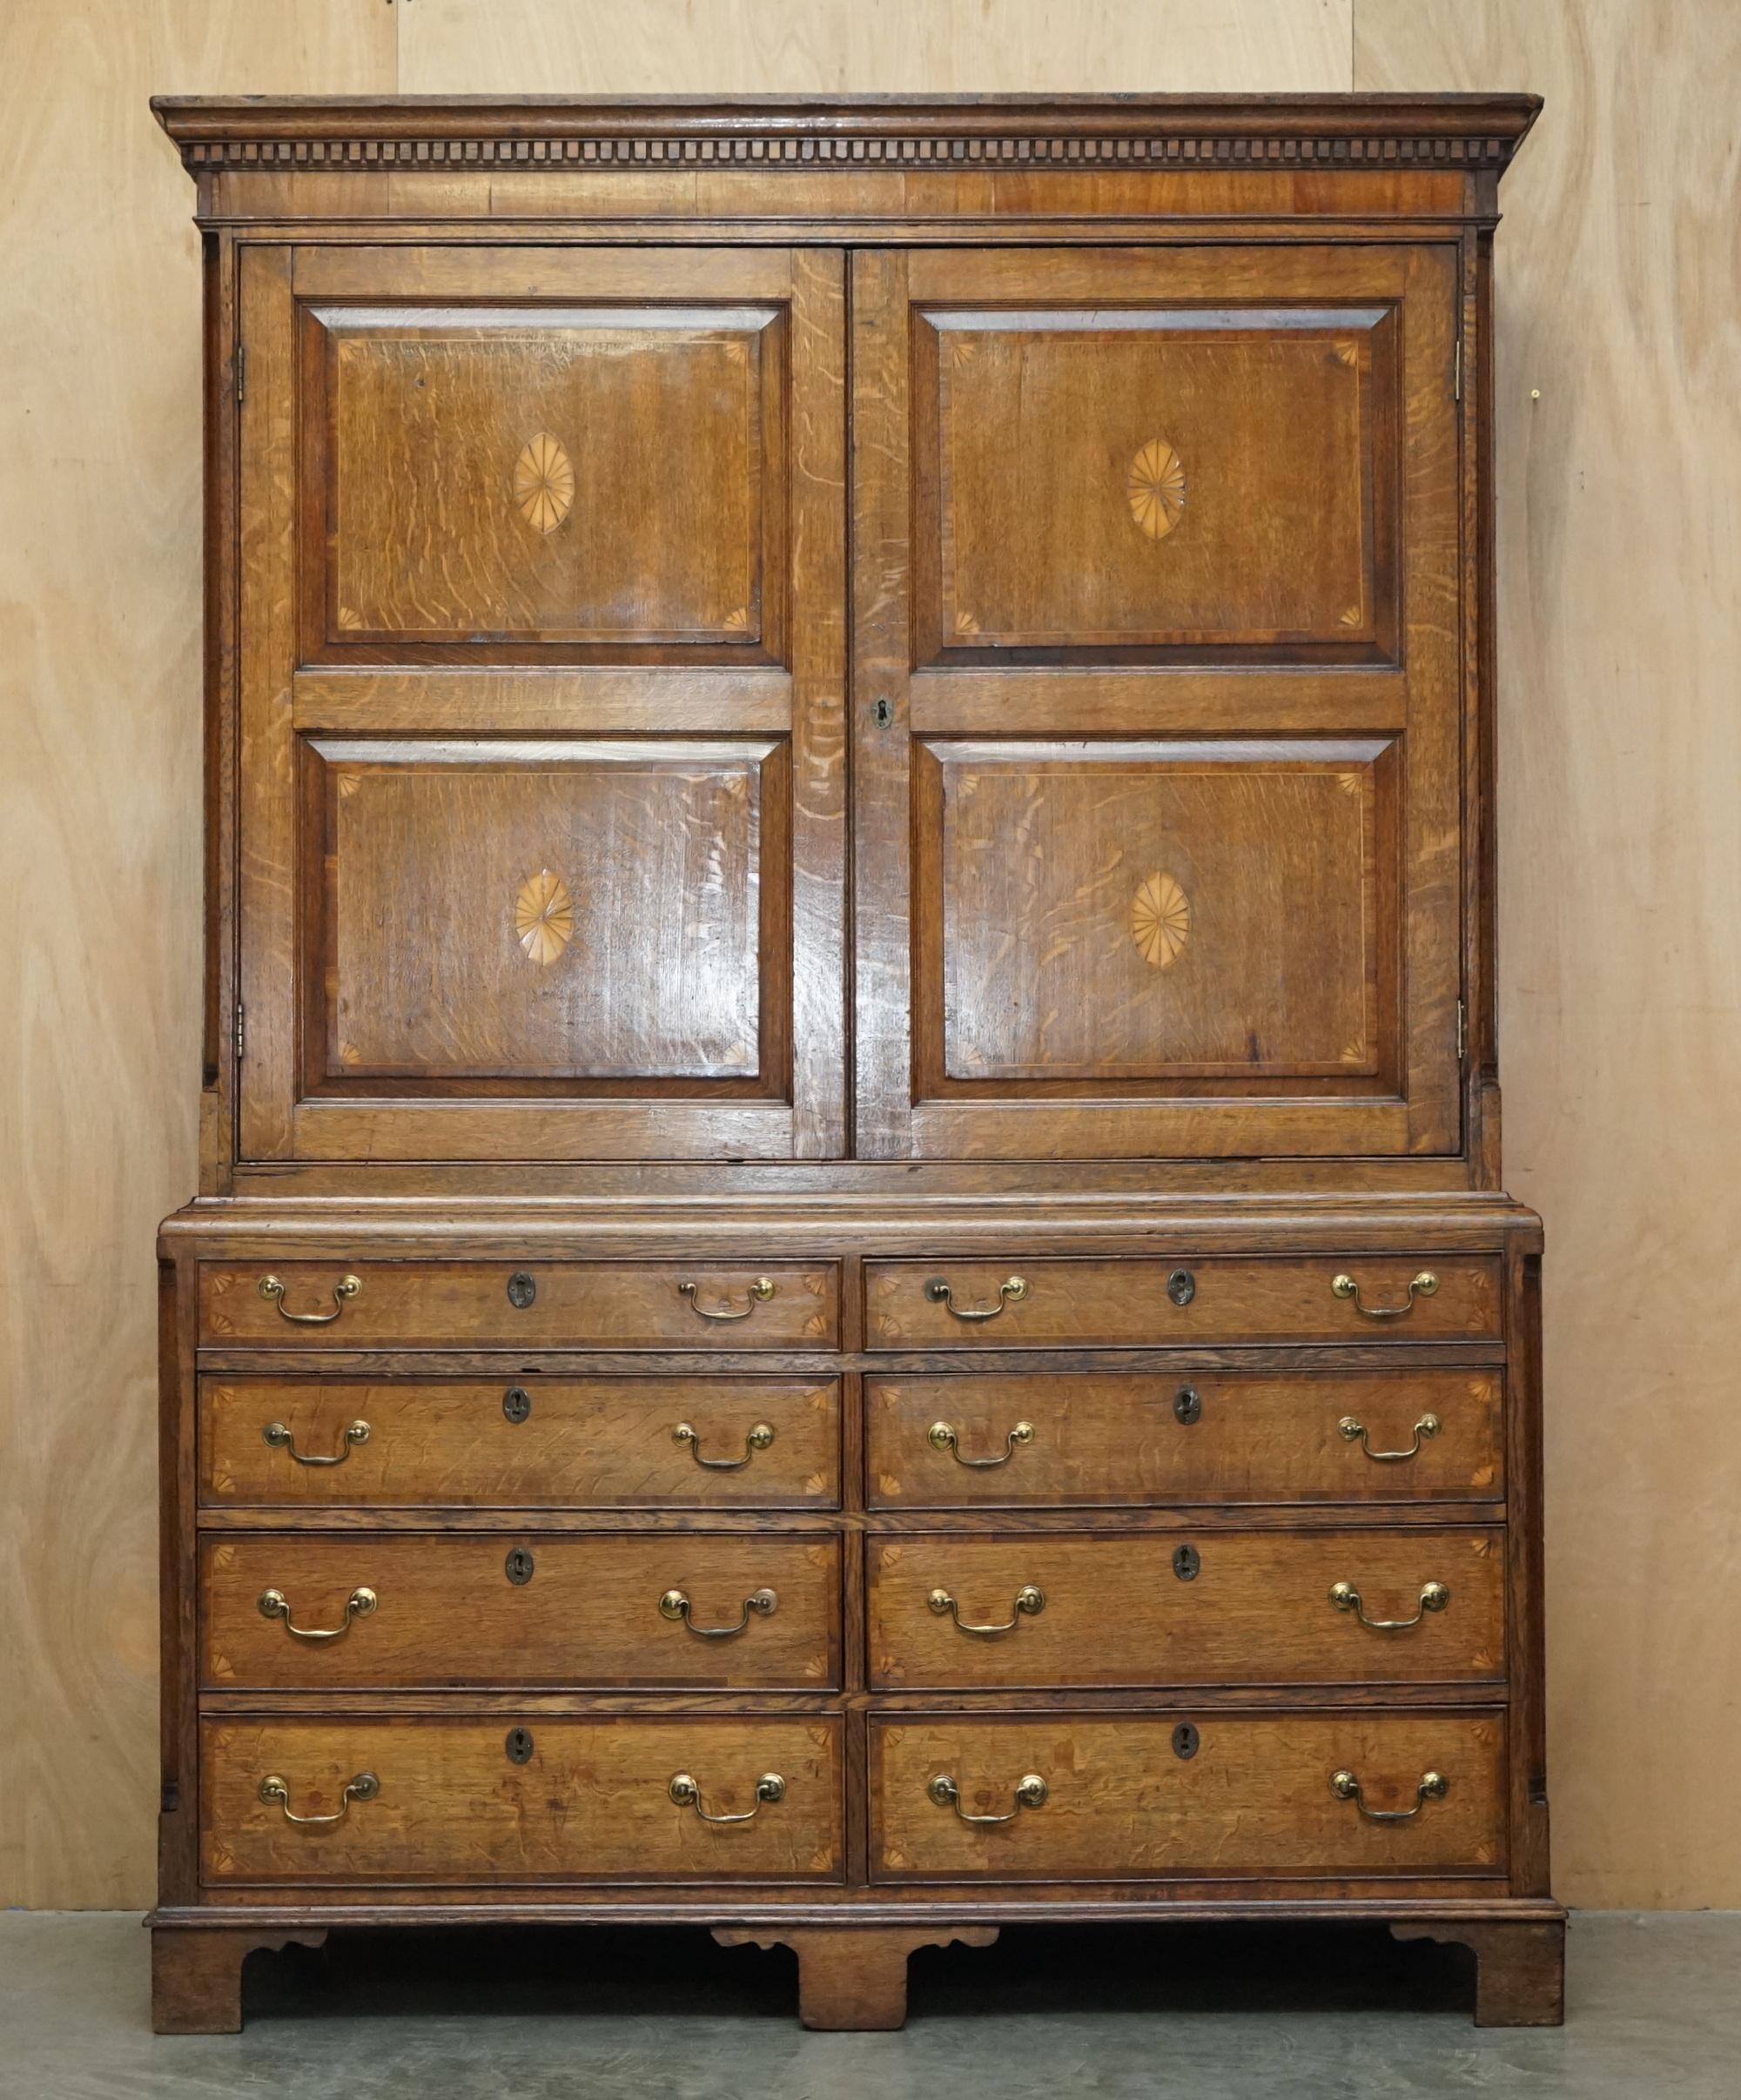 Royal House Antiques

Royal House Antiques is delighted to offer for sale this absolutely exquisite hand made in England circa 1800 Sheraton Housekeepers cupboard Armoire which bank of drawers to the base

Please note the delivery fee listed is just